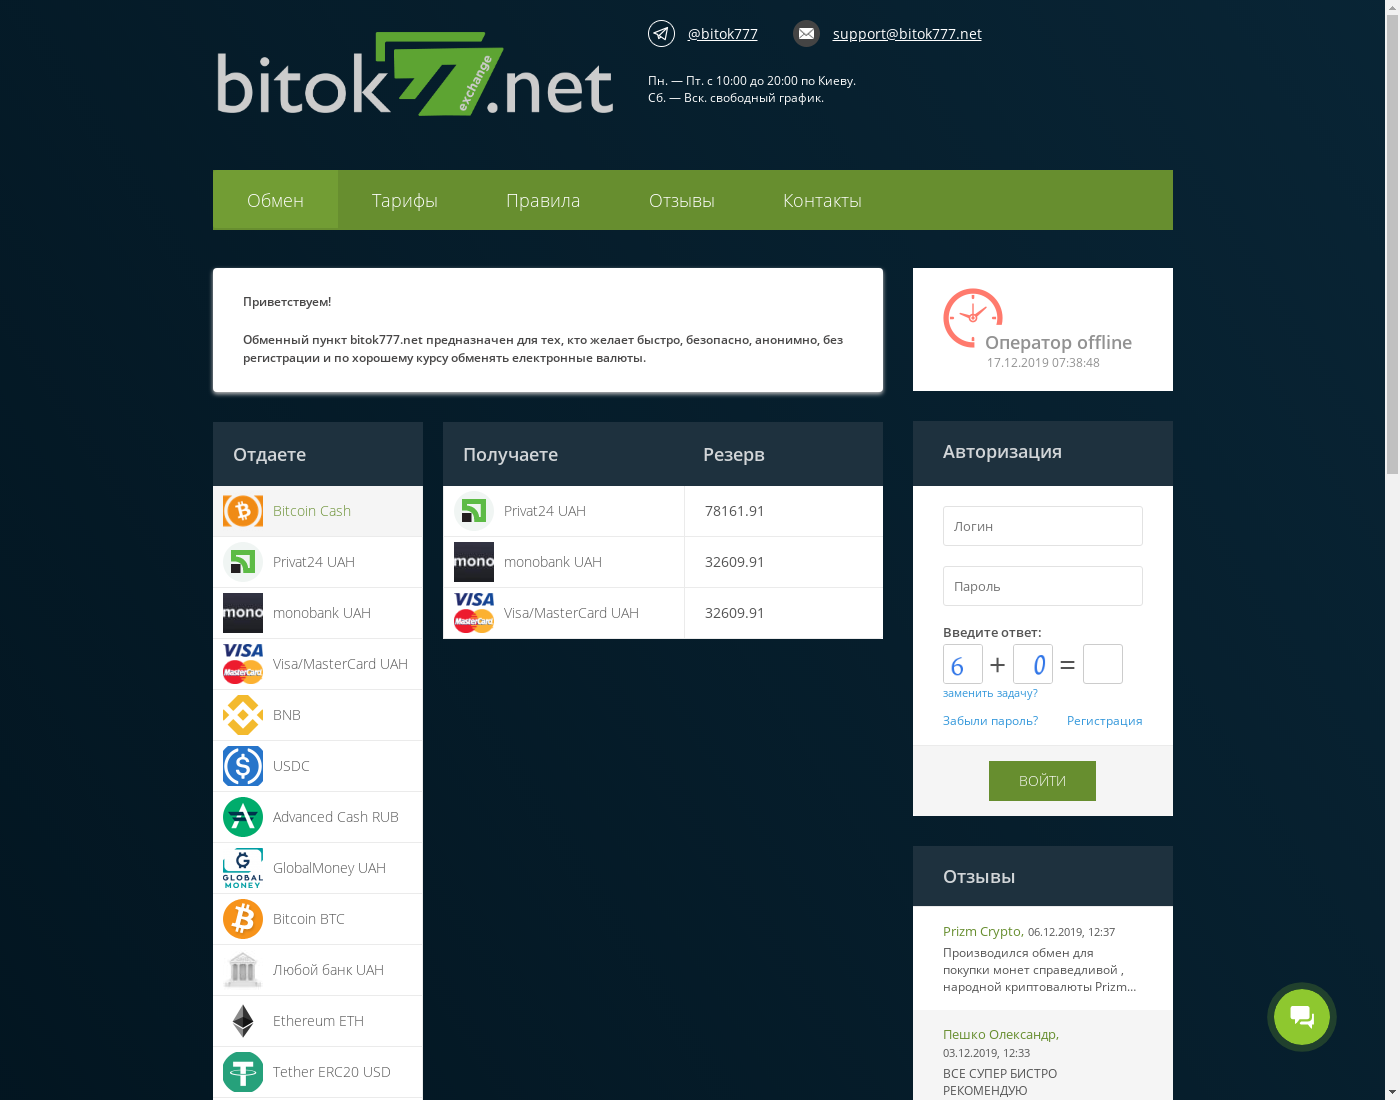 bitok777 user interface: the home page in English